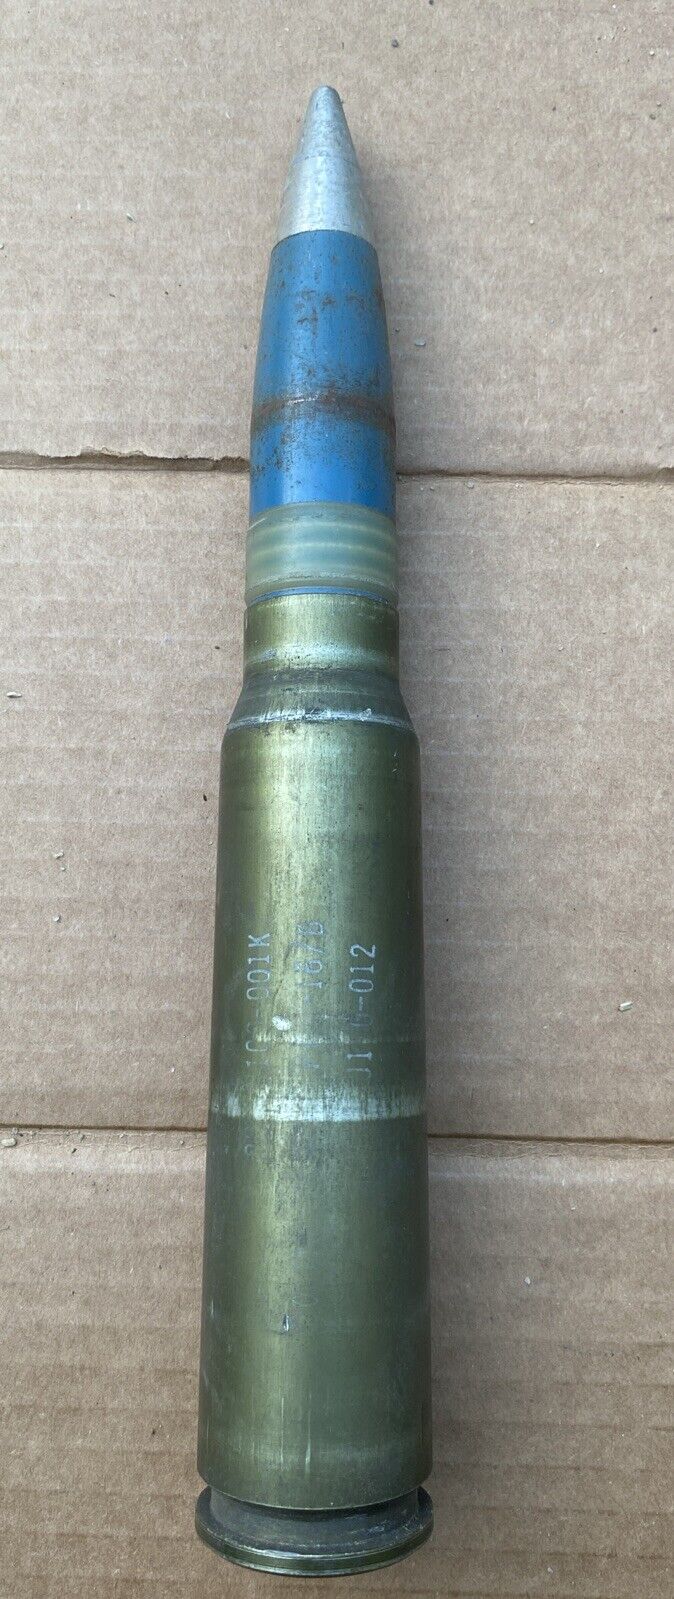 A-10 Warthog 30MM Cannon Collectors Dummy Round Cartridge 30x173